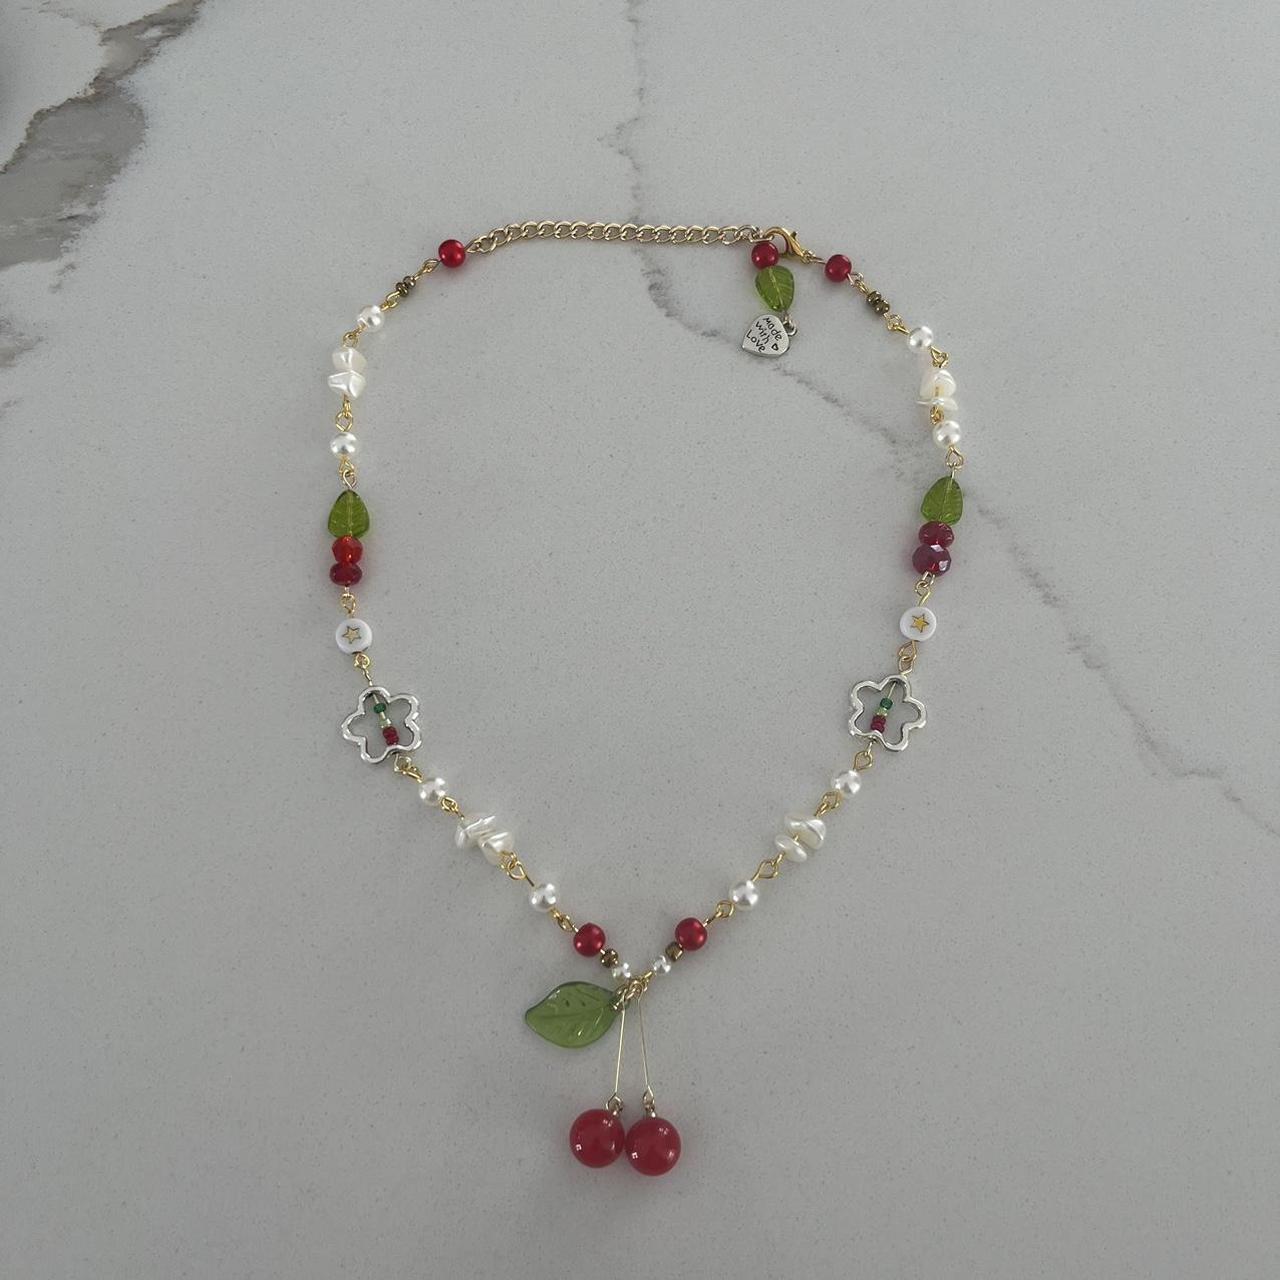 Cherry Beaded Necklace Tutorial: How to Make a Beaded Cherry Necklace 